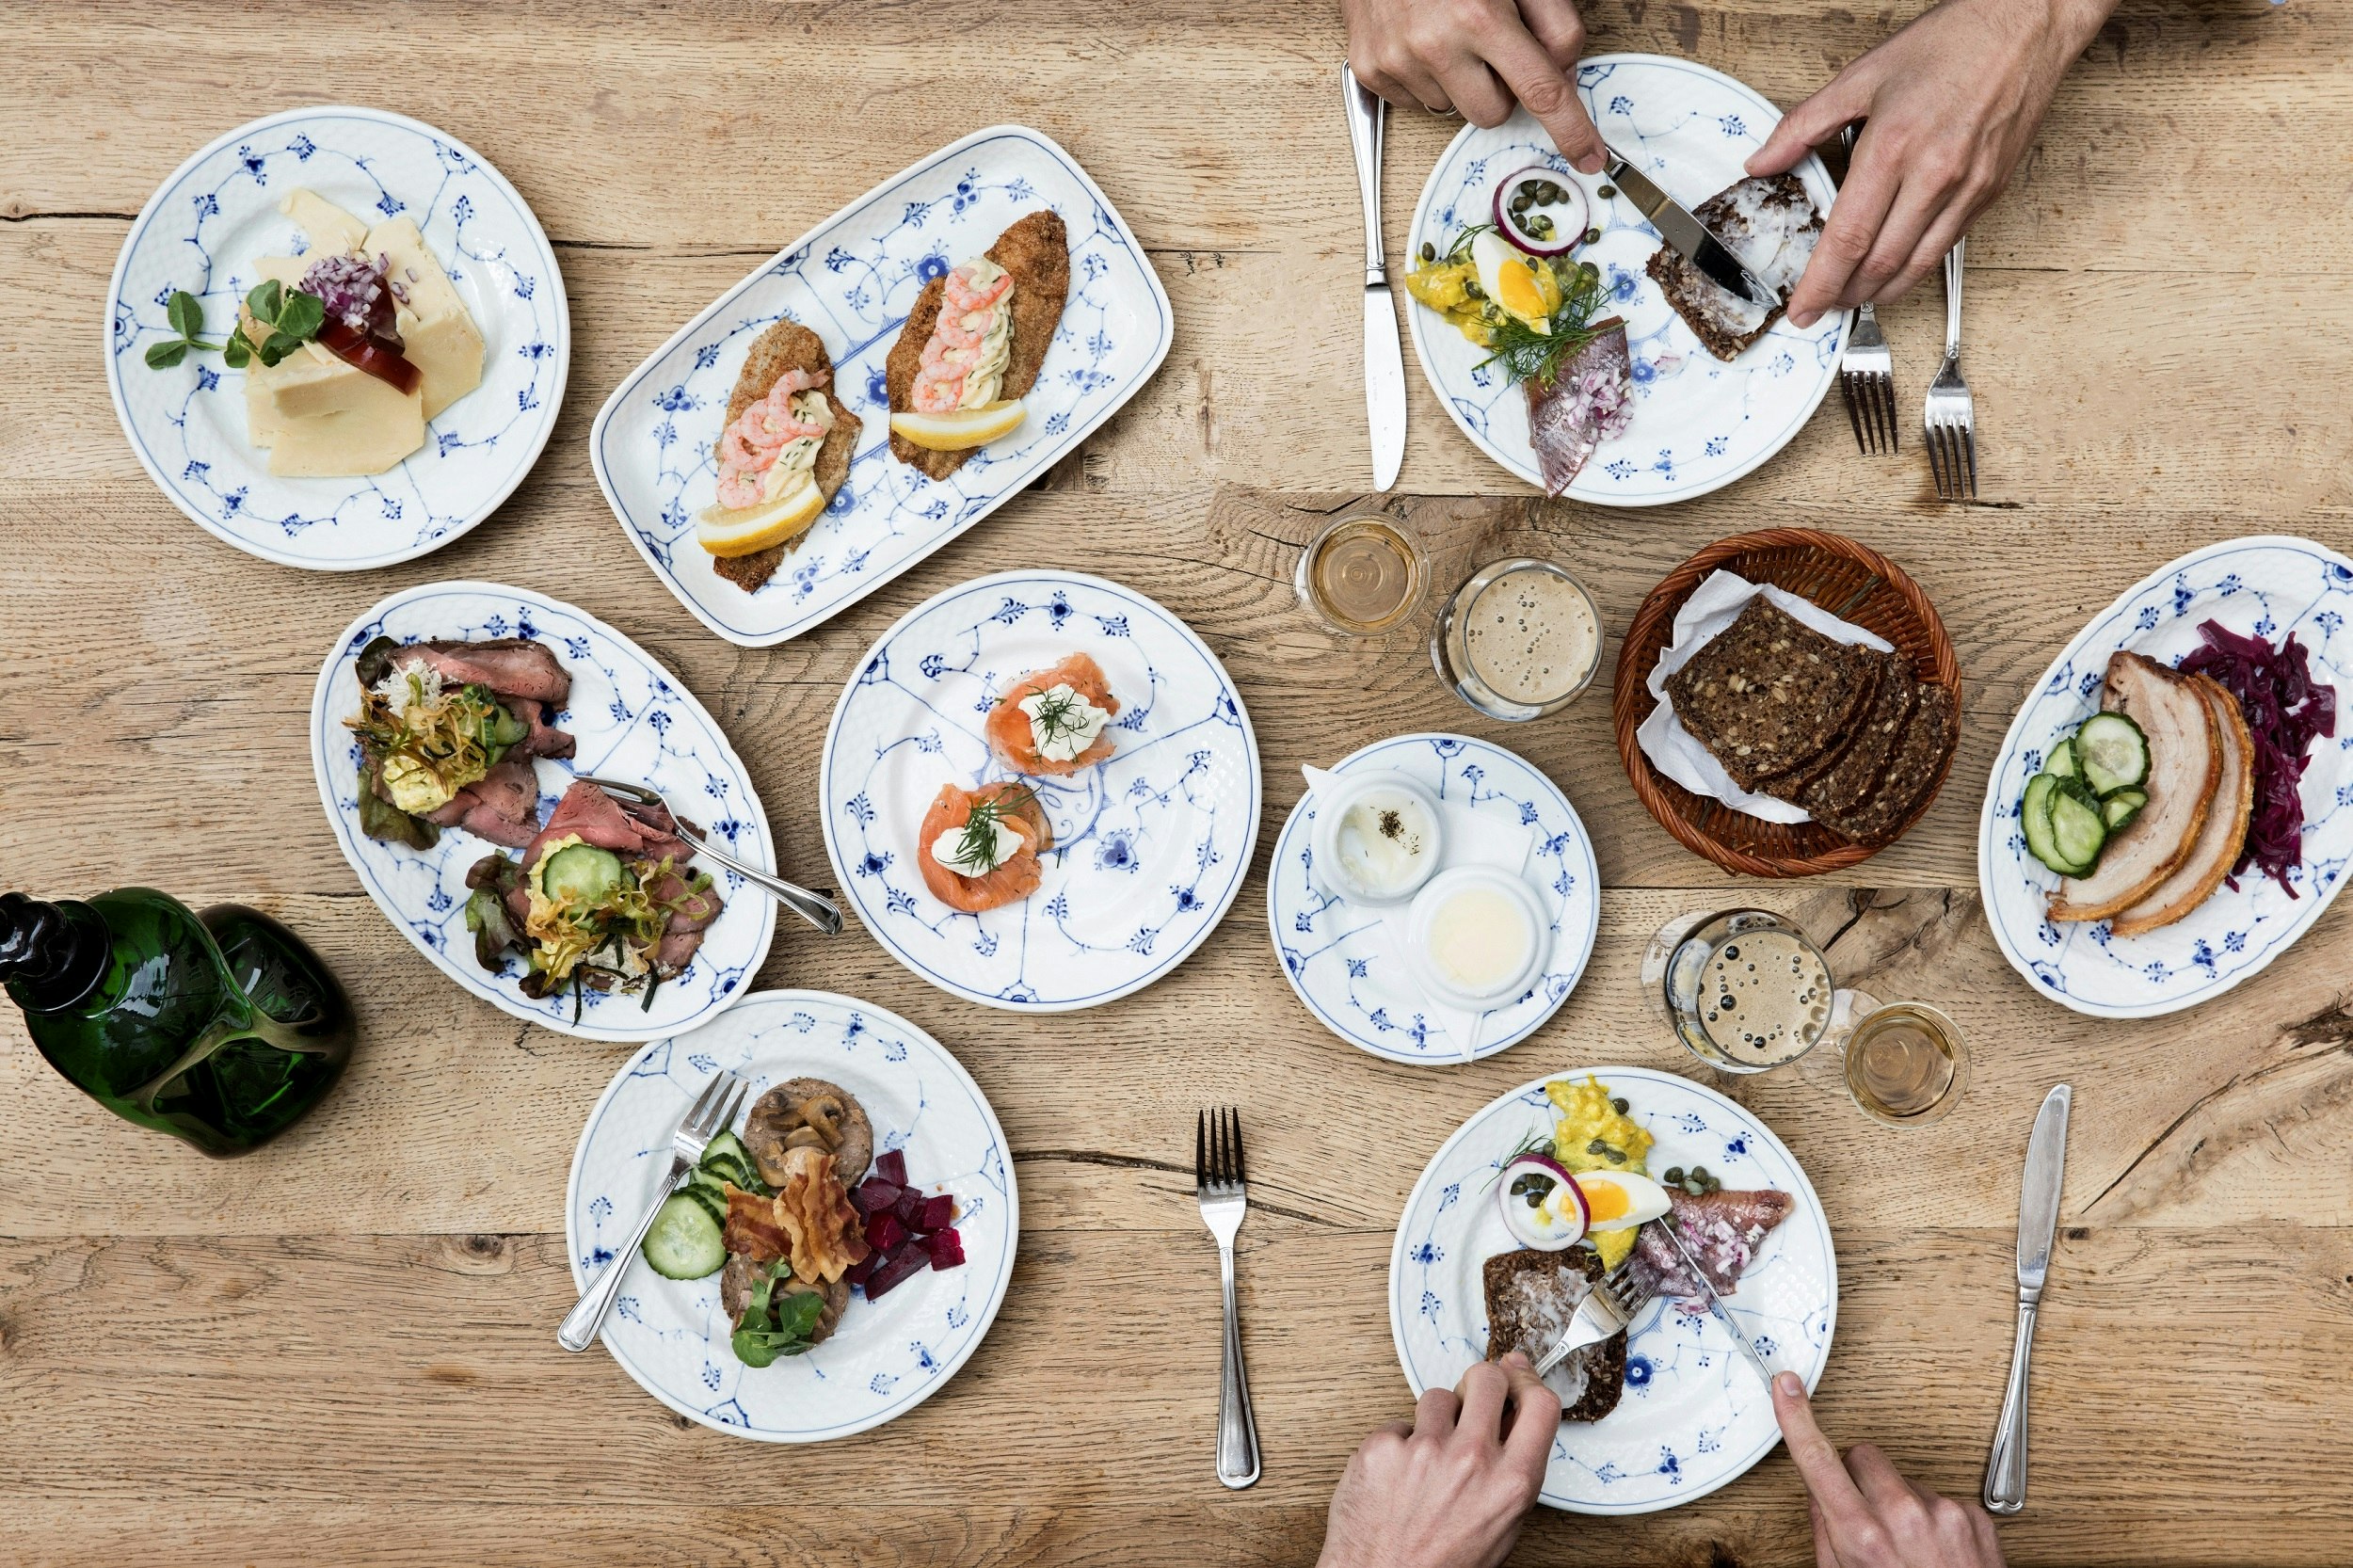 A warm oak table is laden with plates of smørrebrød, with two people's hands visible on each side; both people are using knives and forks to eat.